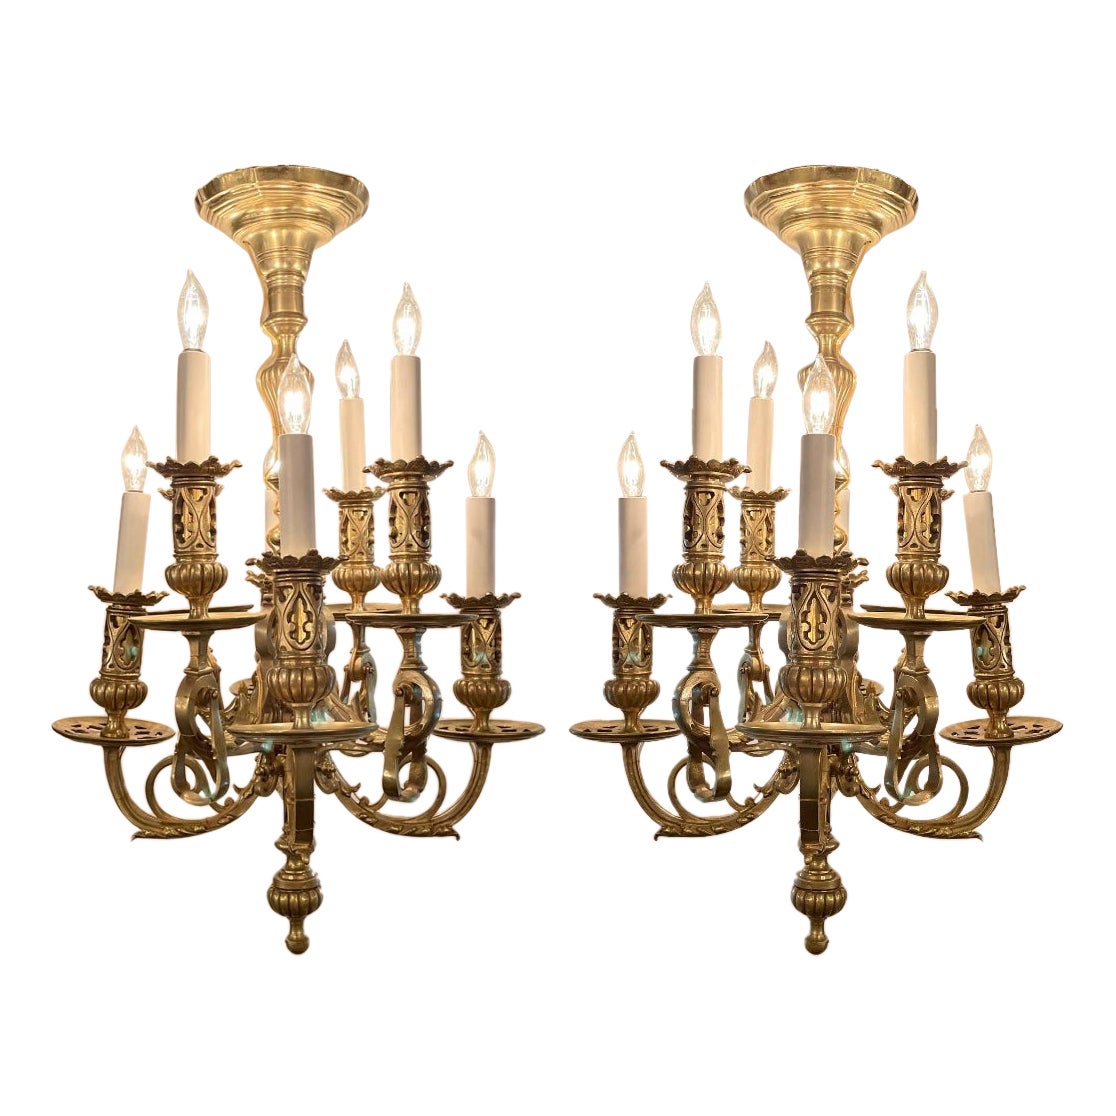 Pair Antique French Louis XIII Style Gold Bronze Chandeliers circa 1860-1870 For Sale